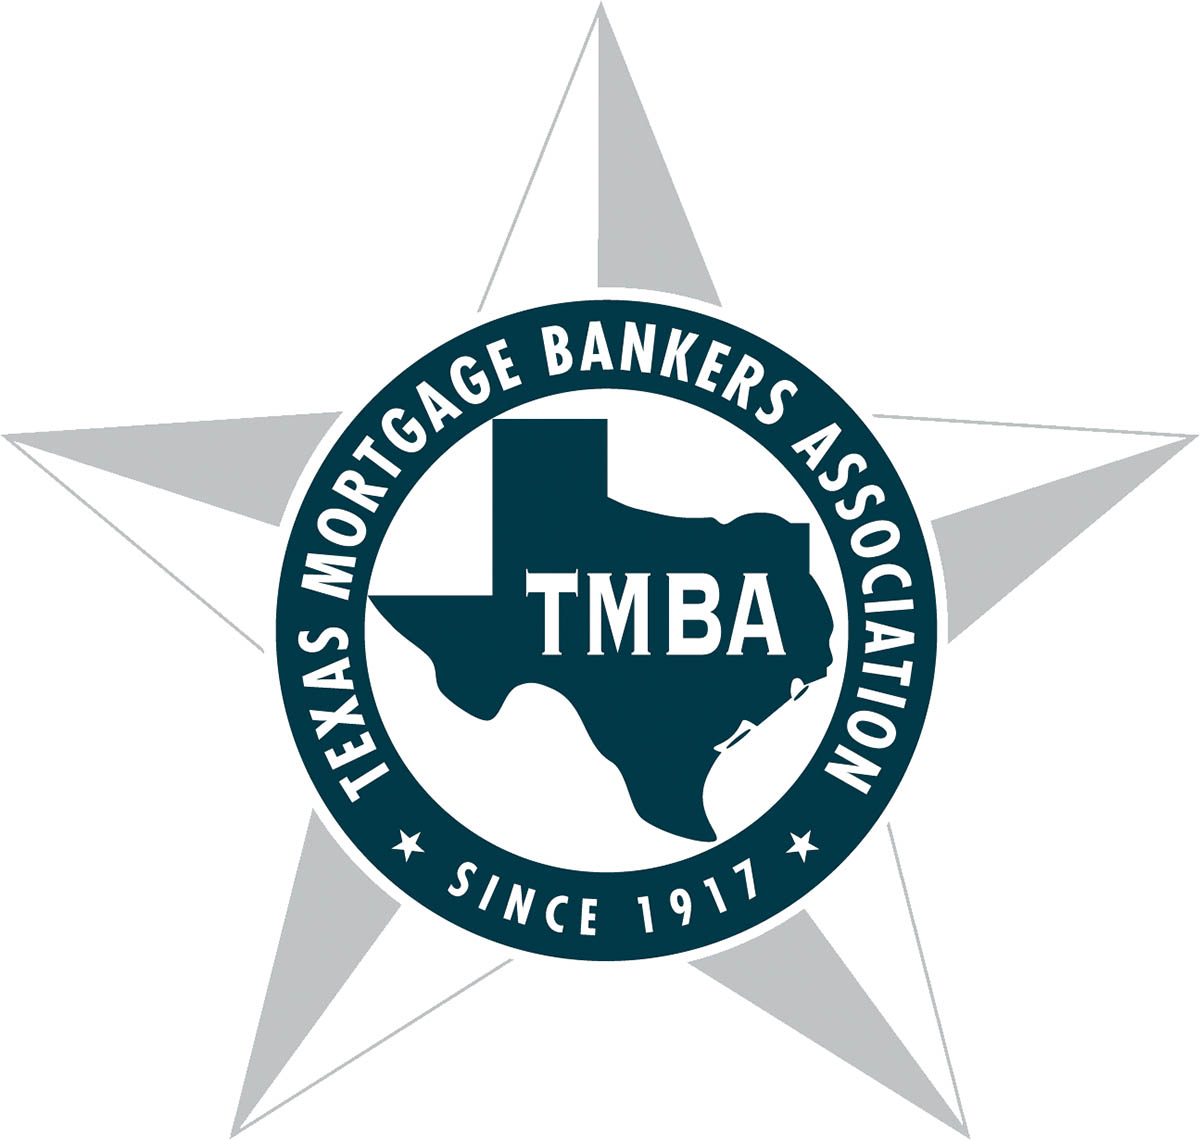 Record Attendance Expected at Texas Mortgage Bankers Association’s